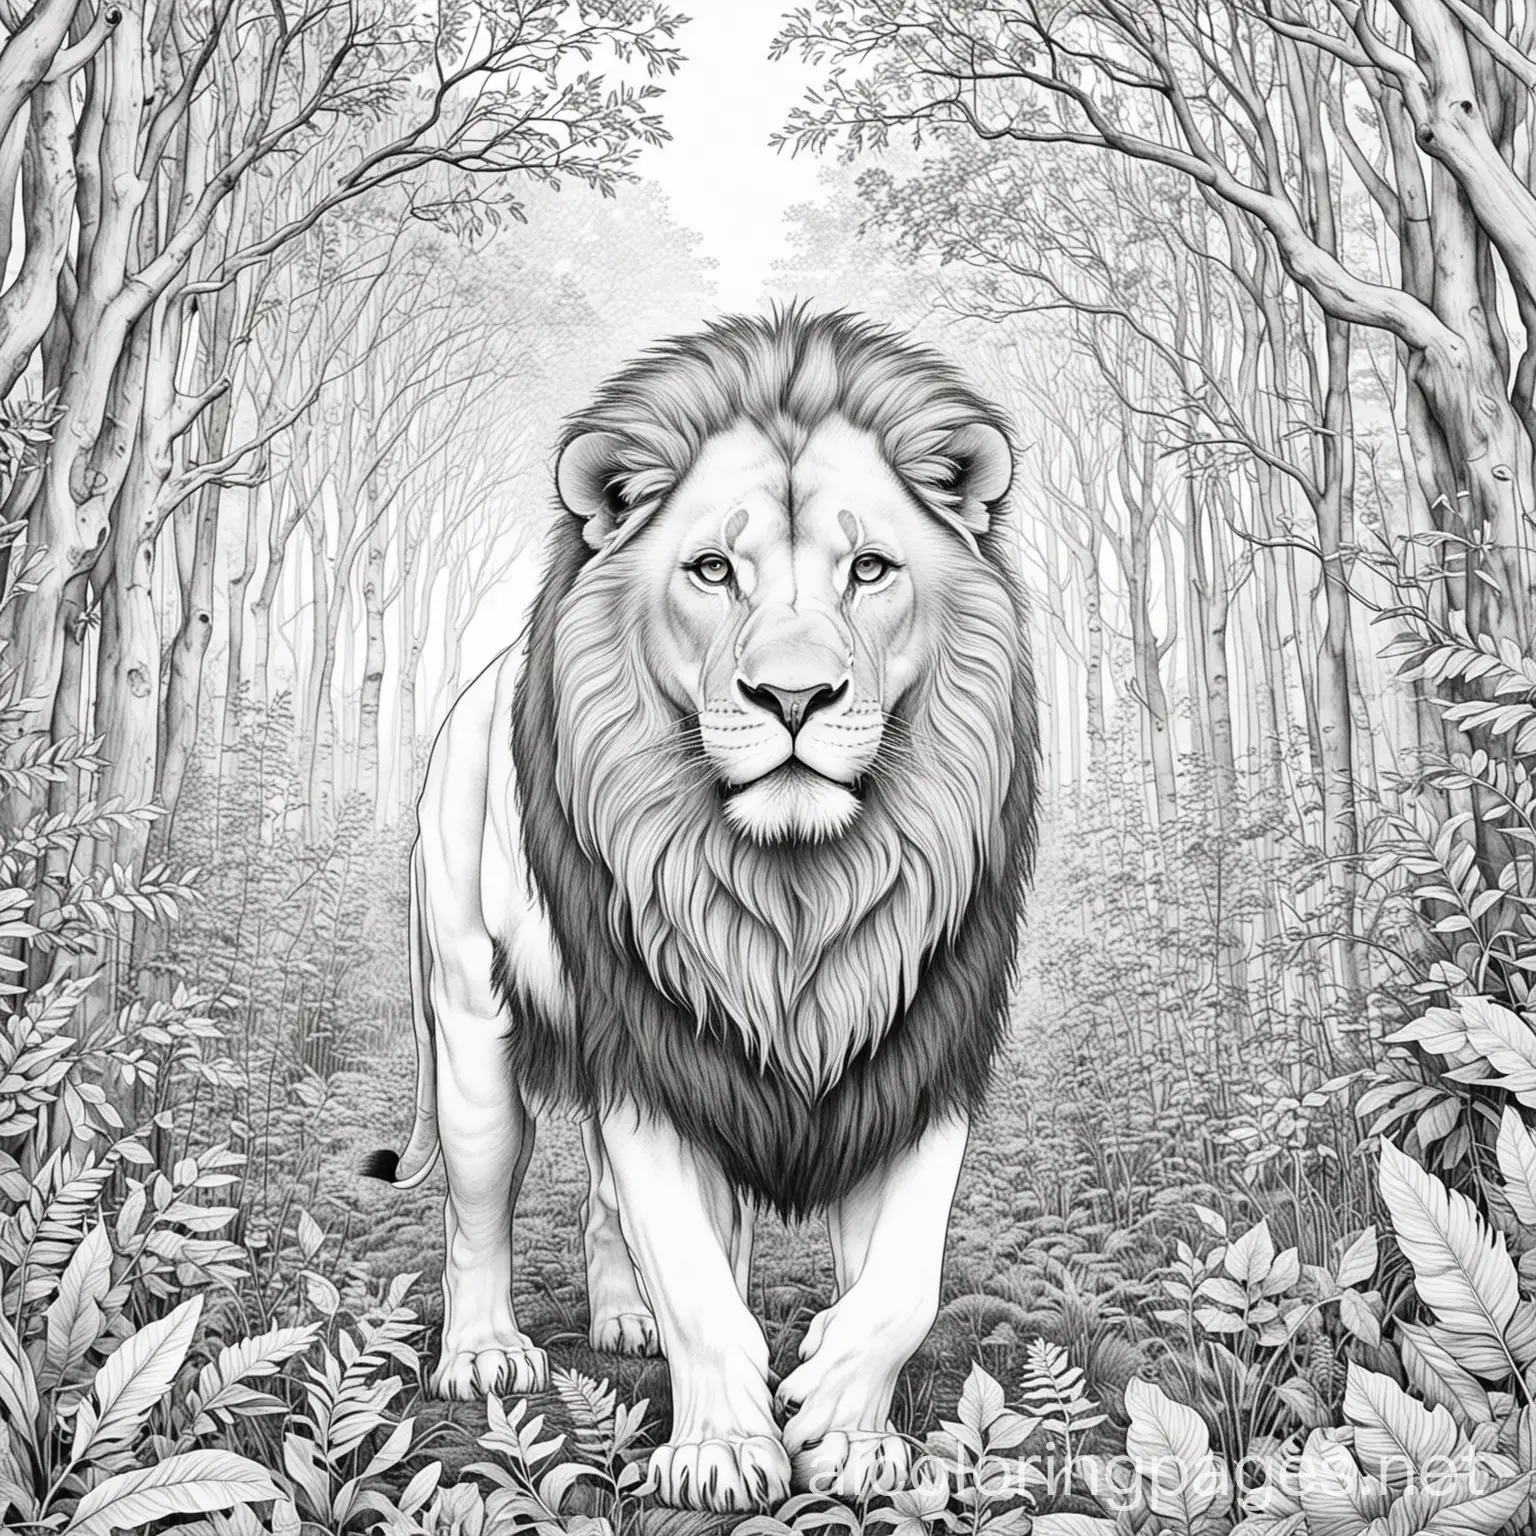 a lion in a forest, Coloring Page, black and white, line art, white background, Simplicity, Ample White Space. The background of the coloring page is plain white to make it easy for young children to color within the lines. The outlines of all the subjects are easy to distinguish, making it simple for kids to color without too much difficulty